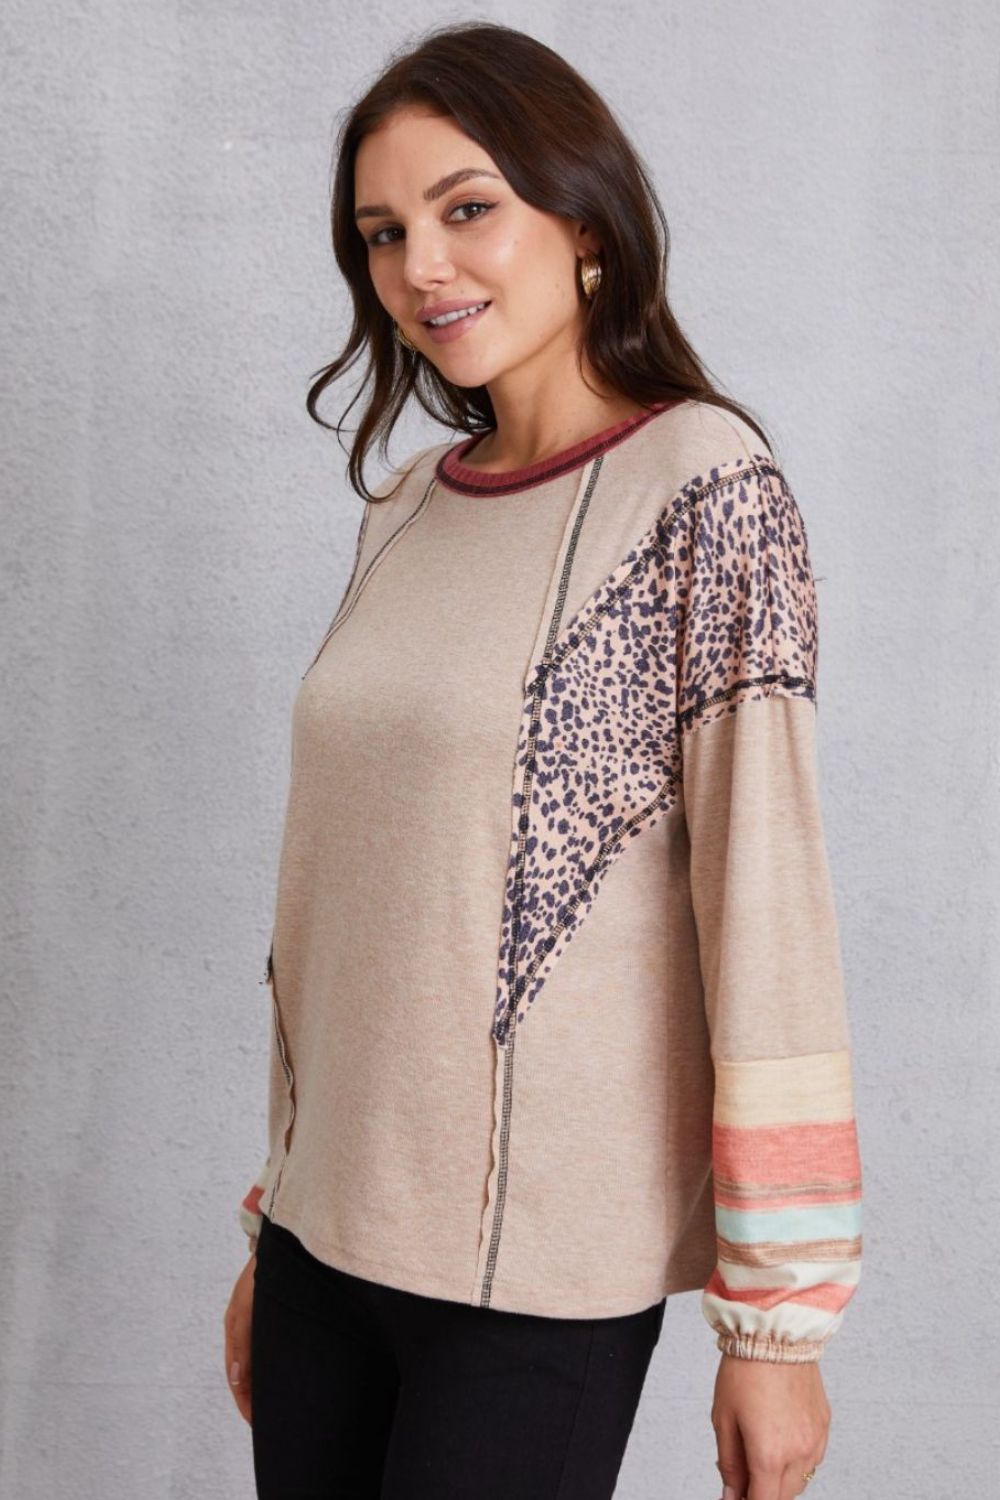 Contrast Stitching Leopard Long Sleeve Blouse - Women’s Clothing & Accessories - Shirts & Tops - 4 - 2024